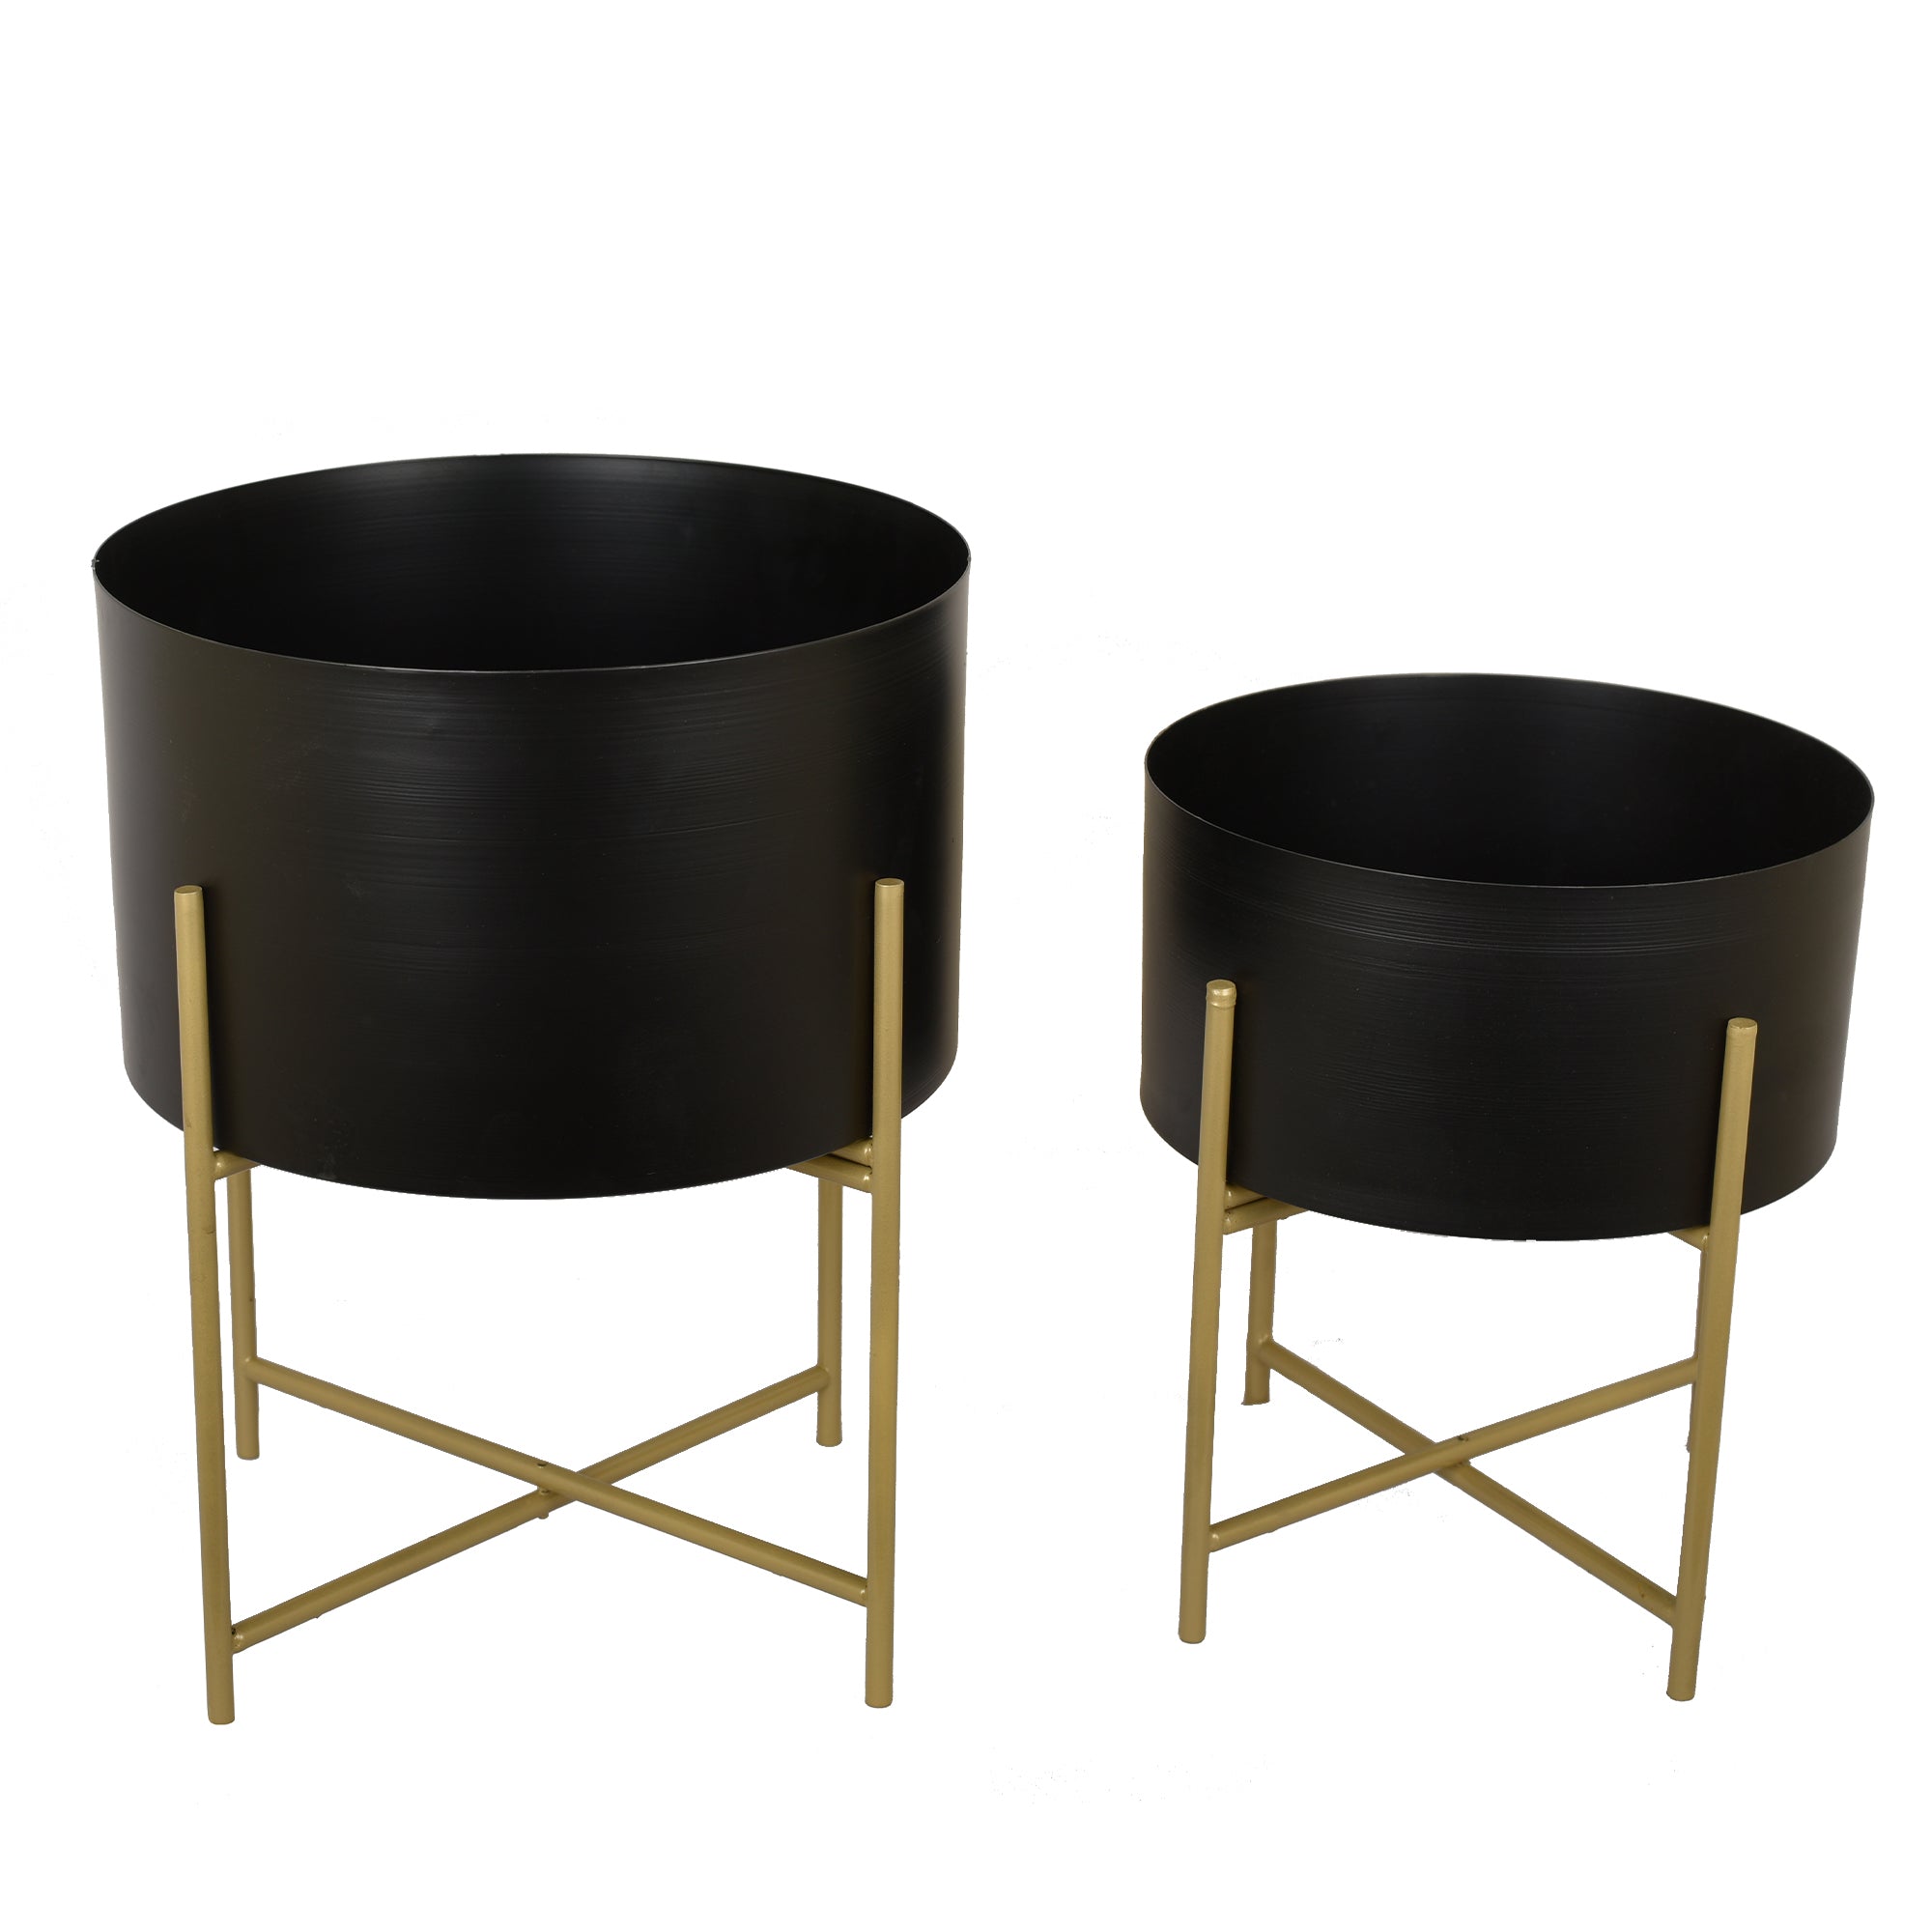 Black Planter with Golden Stand - Detachable Stand 12 inches